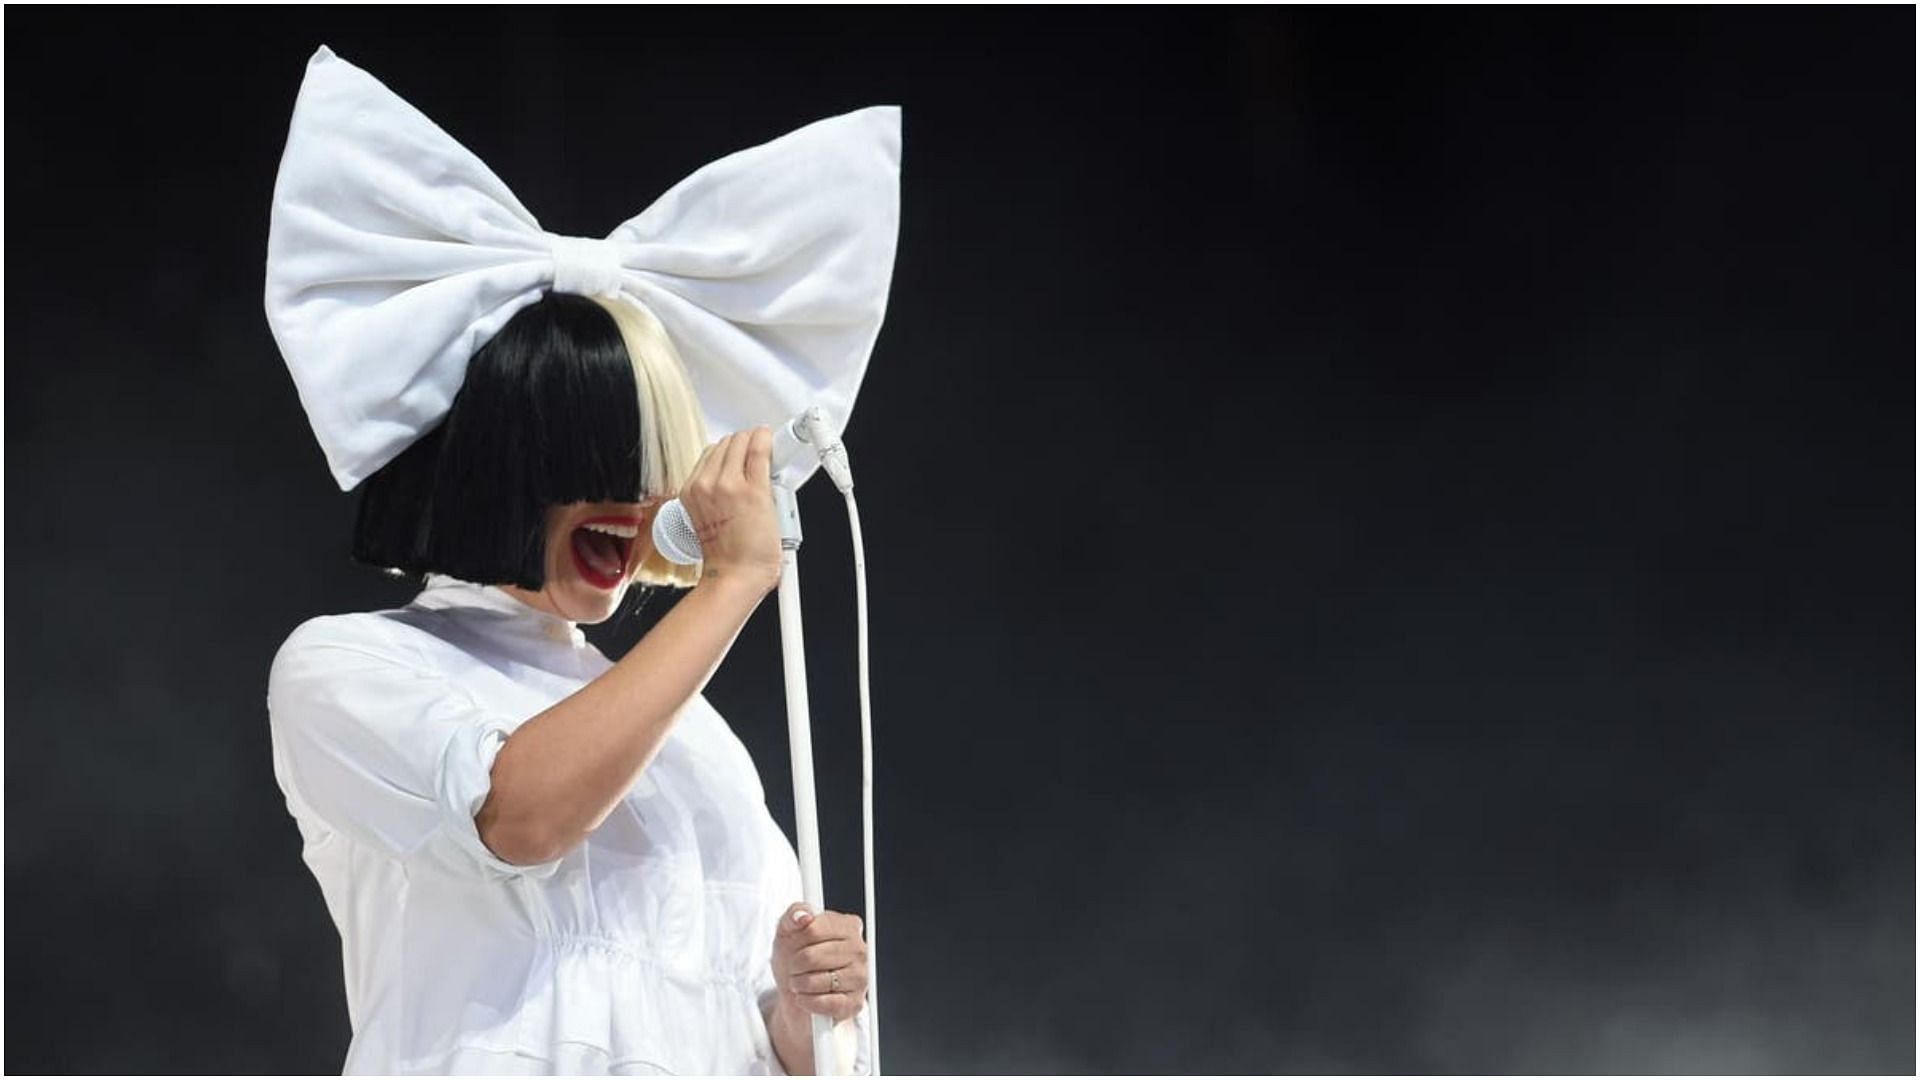 Sia received major backlash when the trailer of her directorial debut Magic dropped in November 2020 (Image via Getty Images/ Stuart C. Wilson)